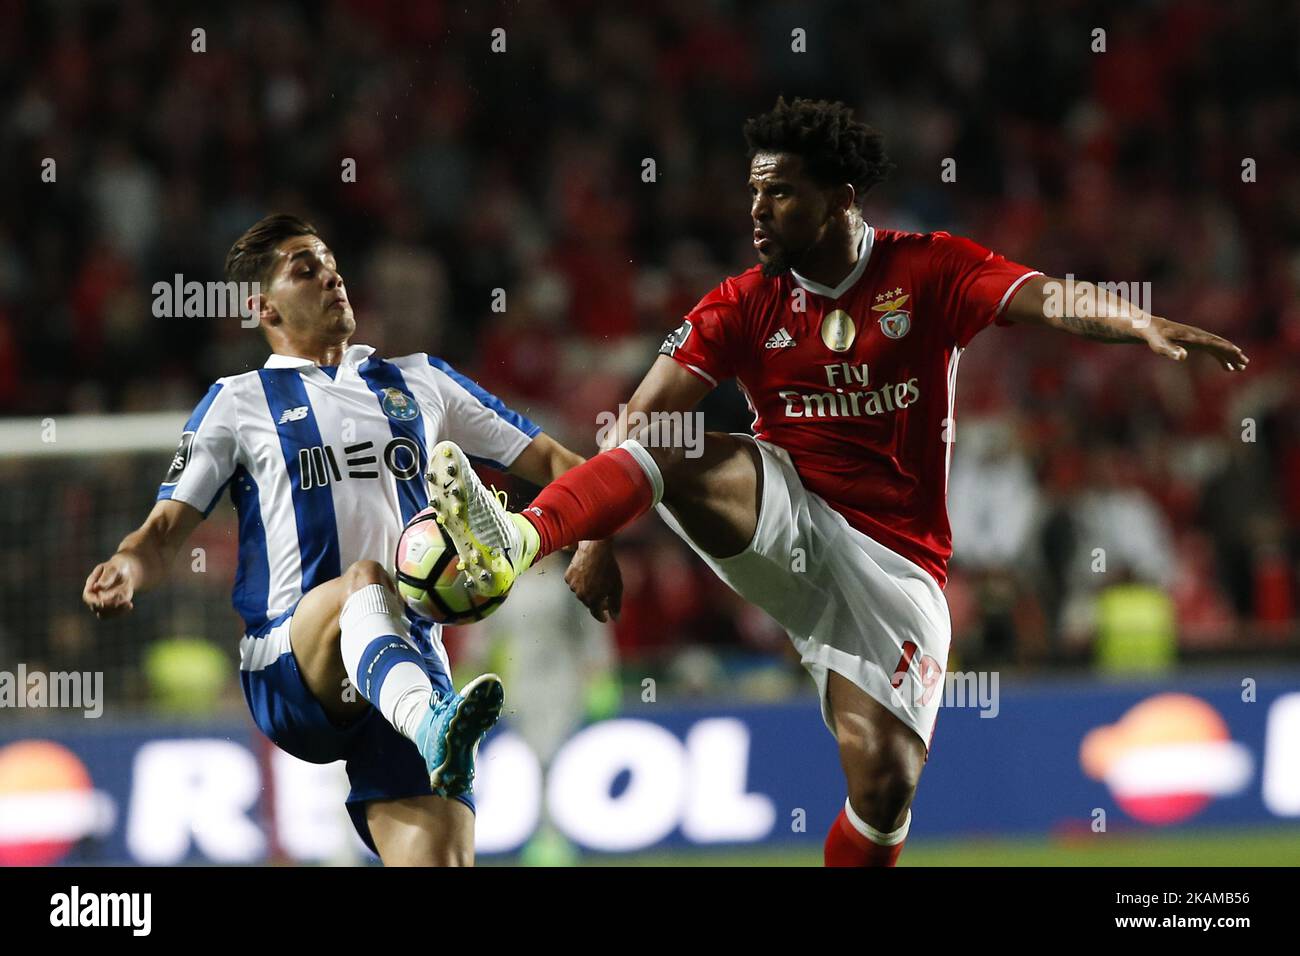 Porto's forward Andre Silva (L) vies for the ball with Benfica's defender Eliseu (R) during Premier League 2016/17 match between SL Benfica vs FC Porto, in Lisbon, on April 1, 2017. (Photo by Carlos Palma/NurPhoto) *** Please Use Credit from Credit Field *** Stock Photo